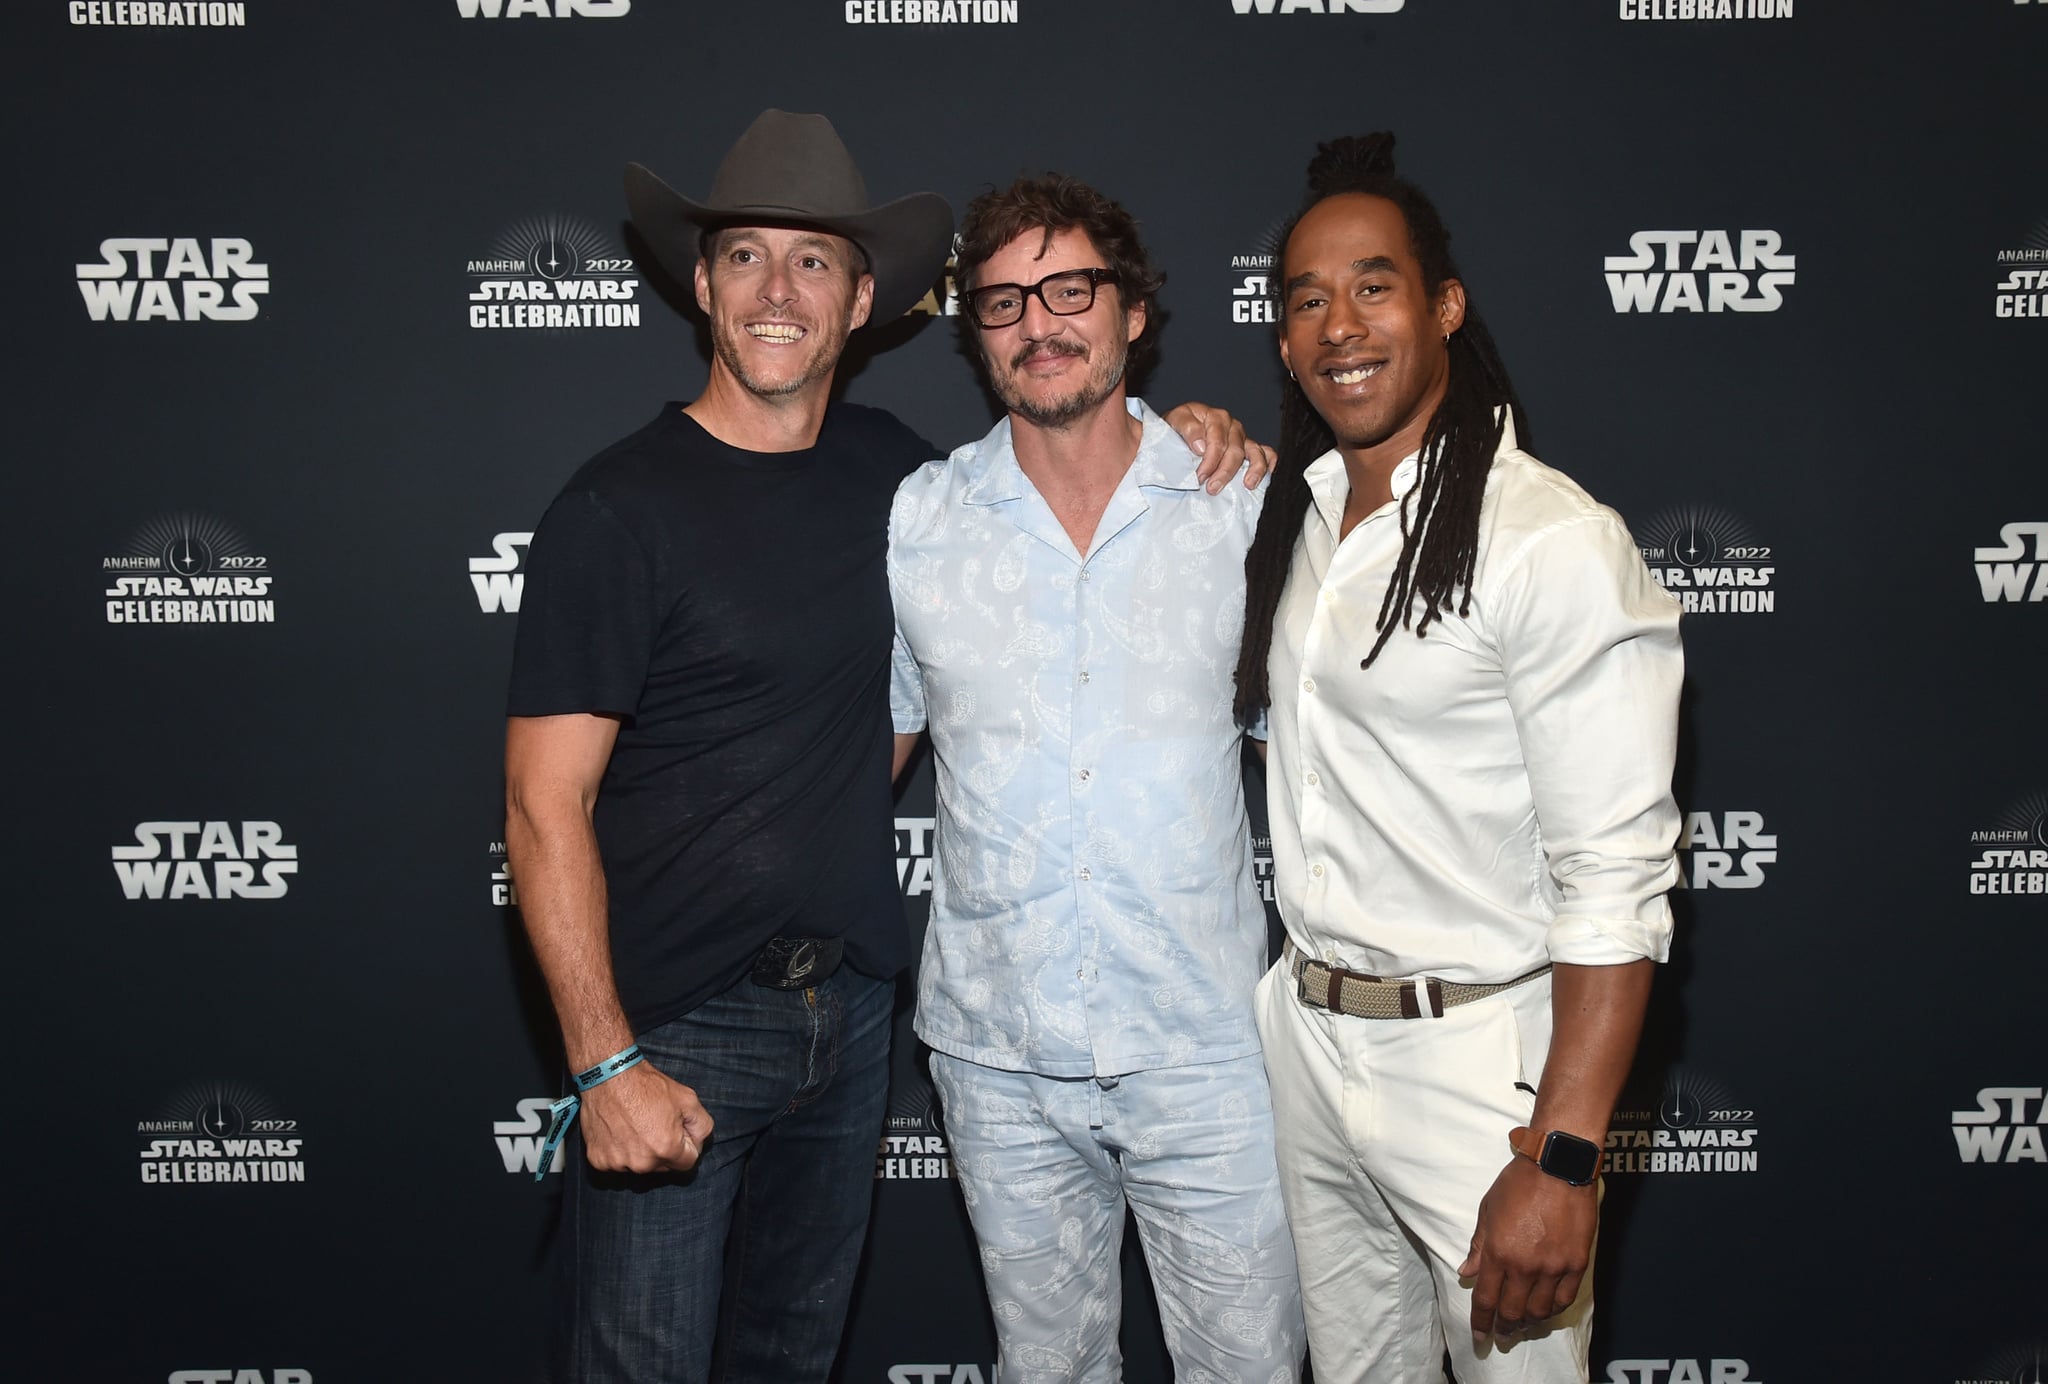 ANAHEIM, CALIFORNIA - MAY 28: (L-R) Brendan Wayne, Pedro Pascal, and Lateef Crowder attend the panel for